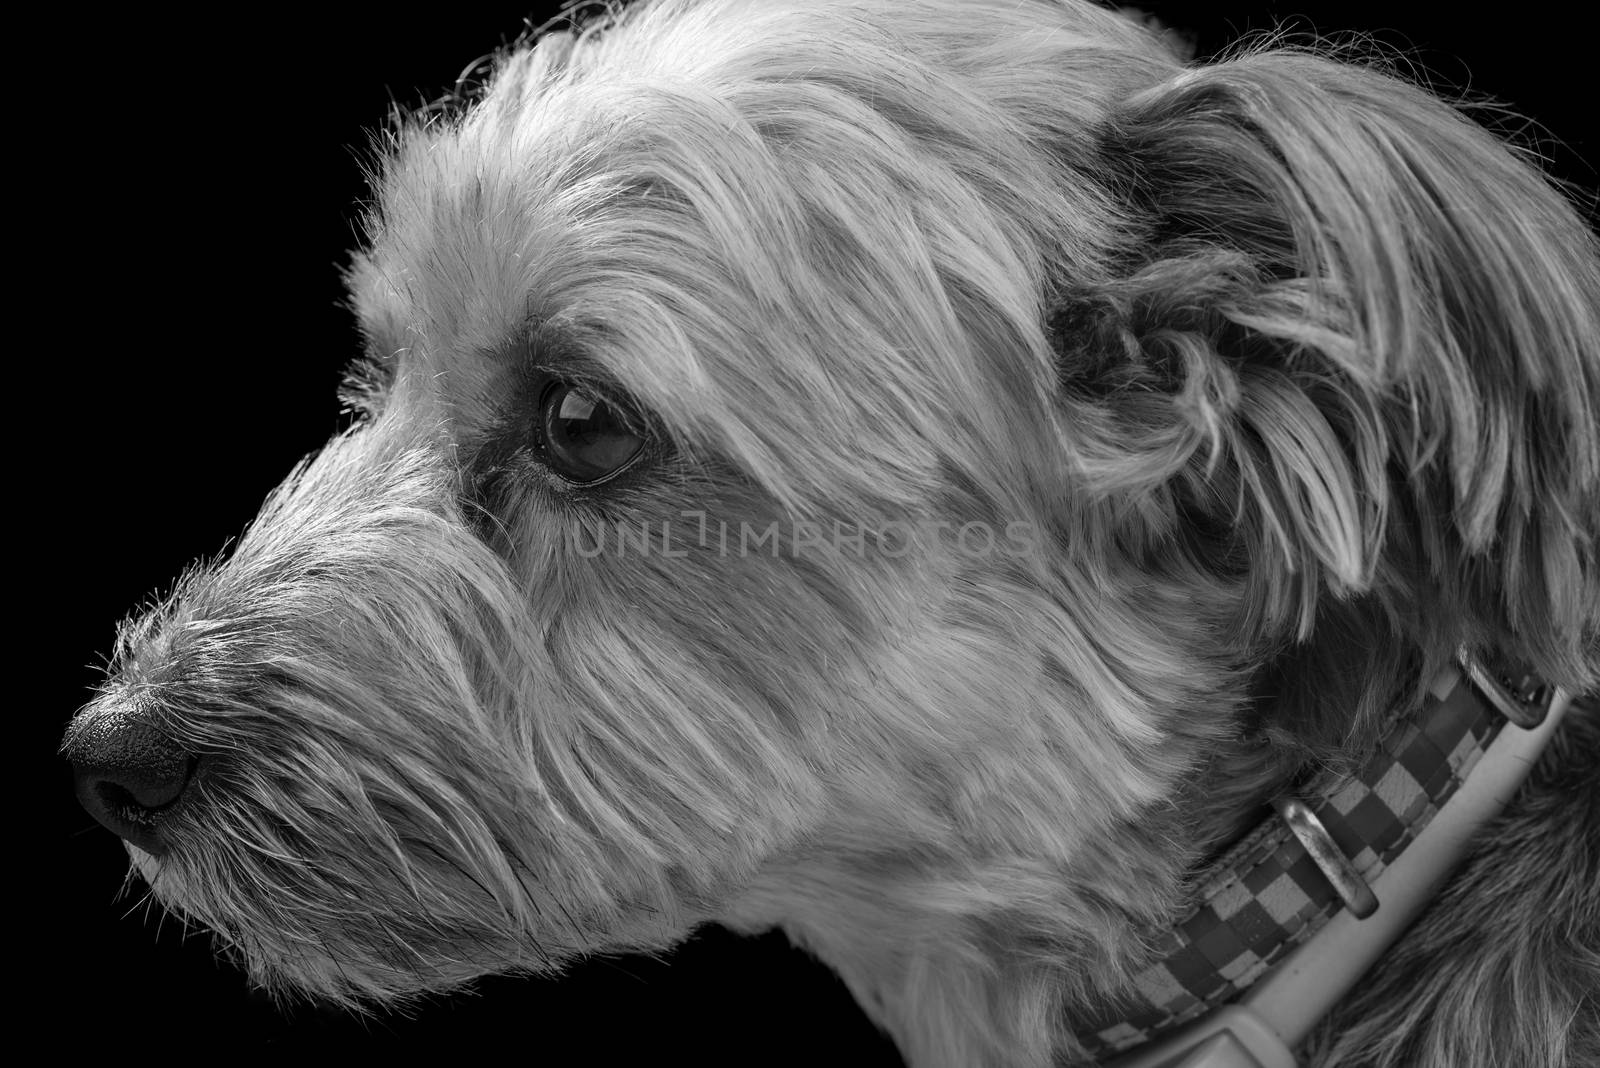 Black and White Dog by justtscott